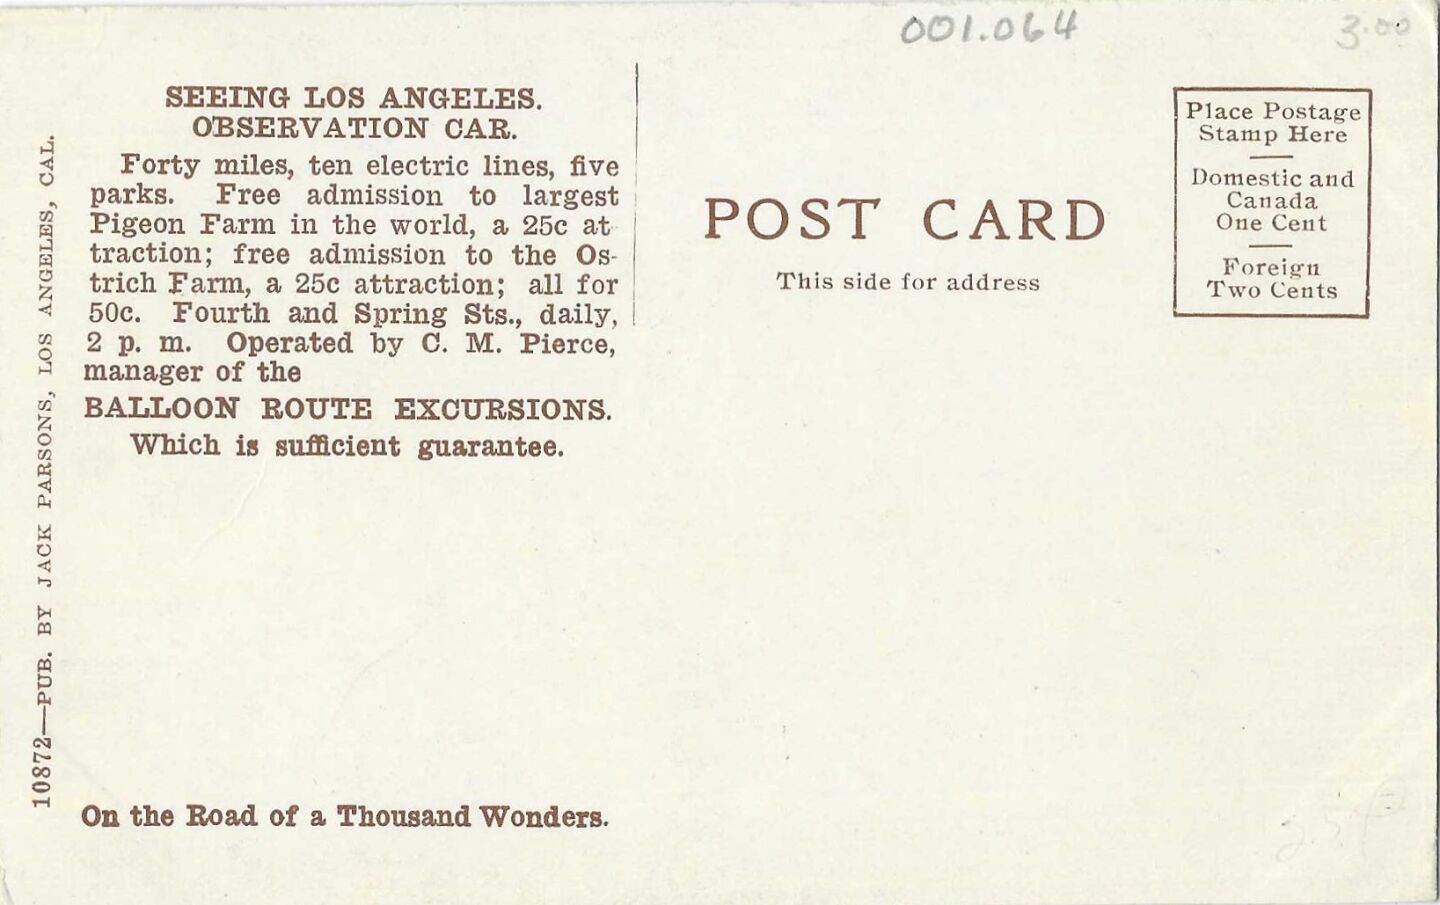 The back of a postcard that depicts the California Alligator Farm on the front explains how people can see the many amusements around Los Angeles traveling by rail.